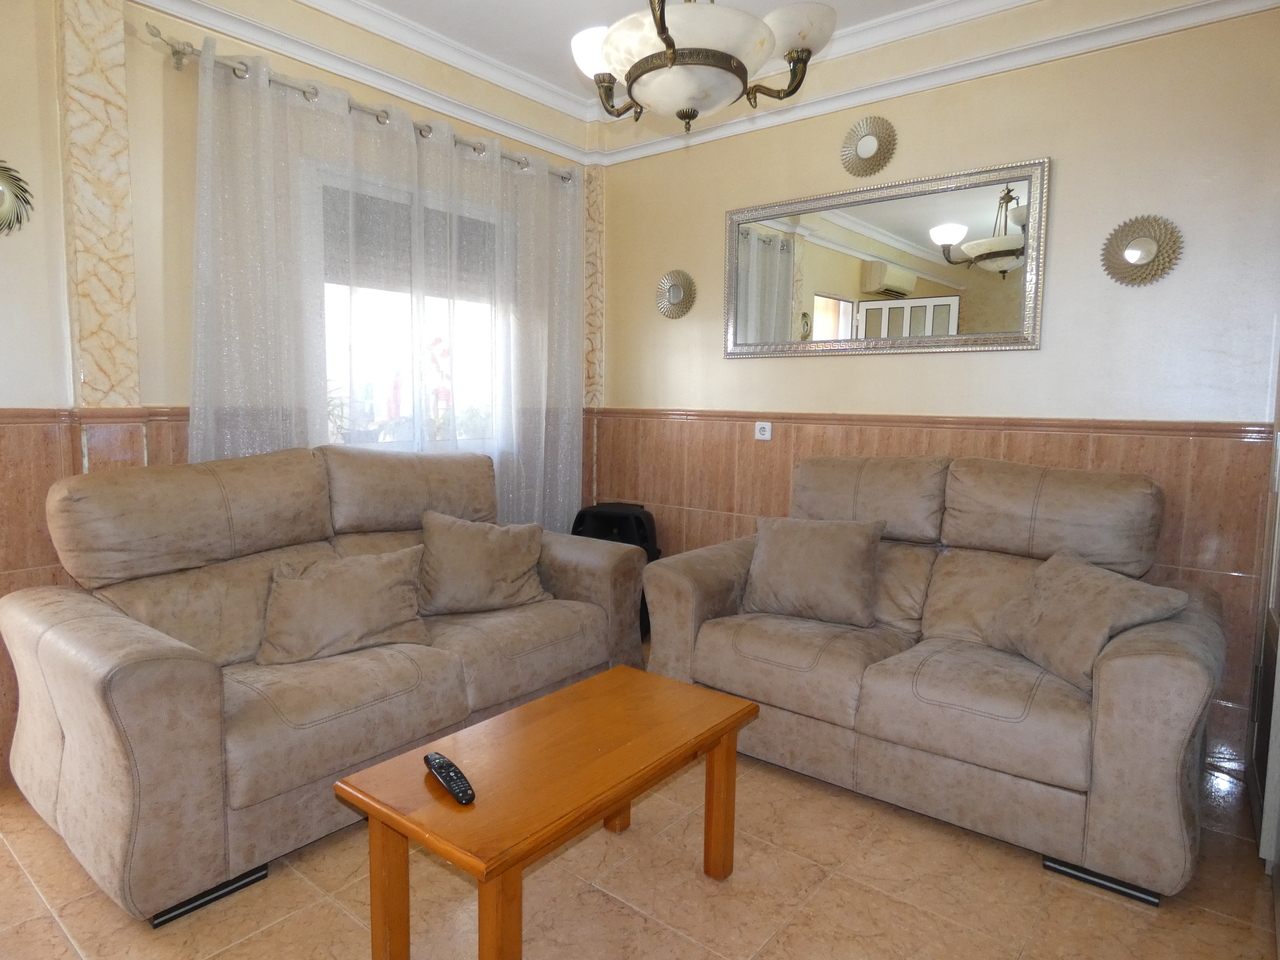 HCB-460: Town house for sale in Algorfa